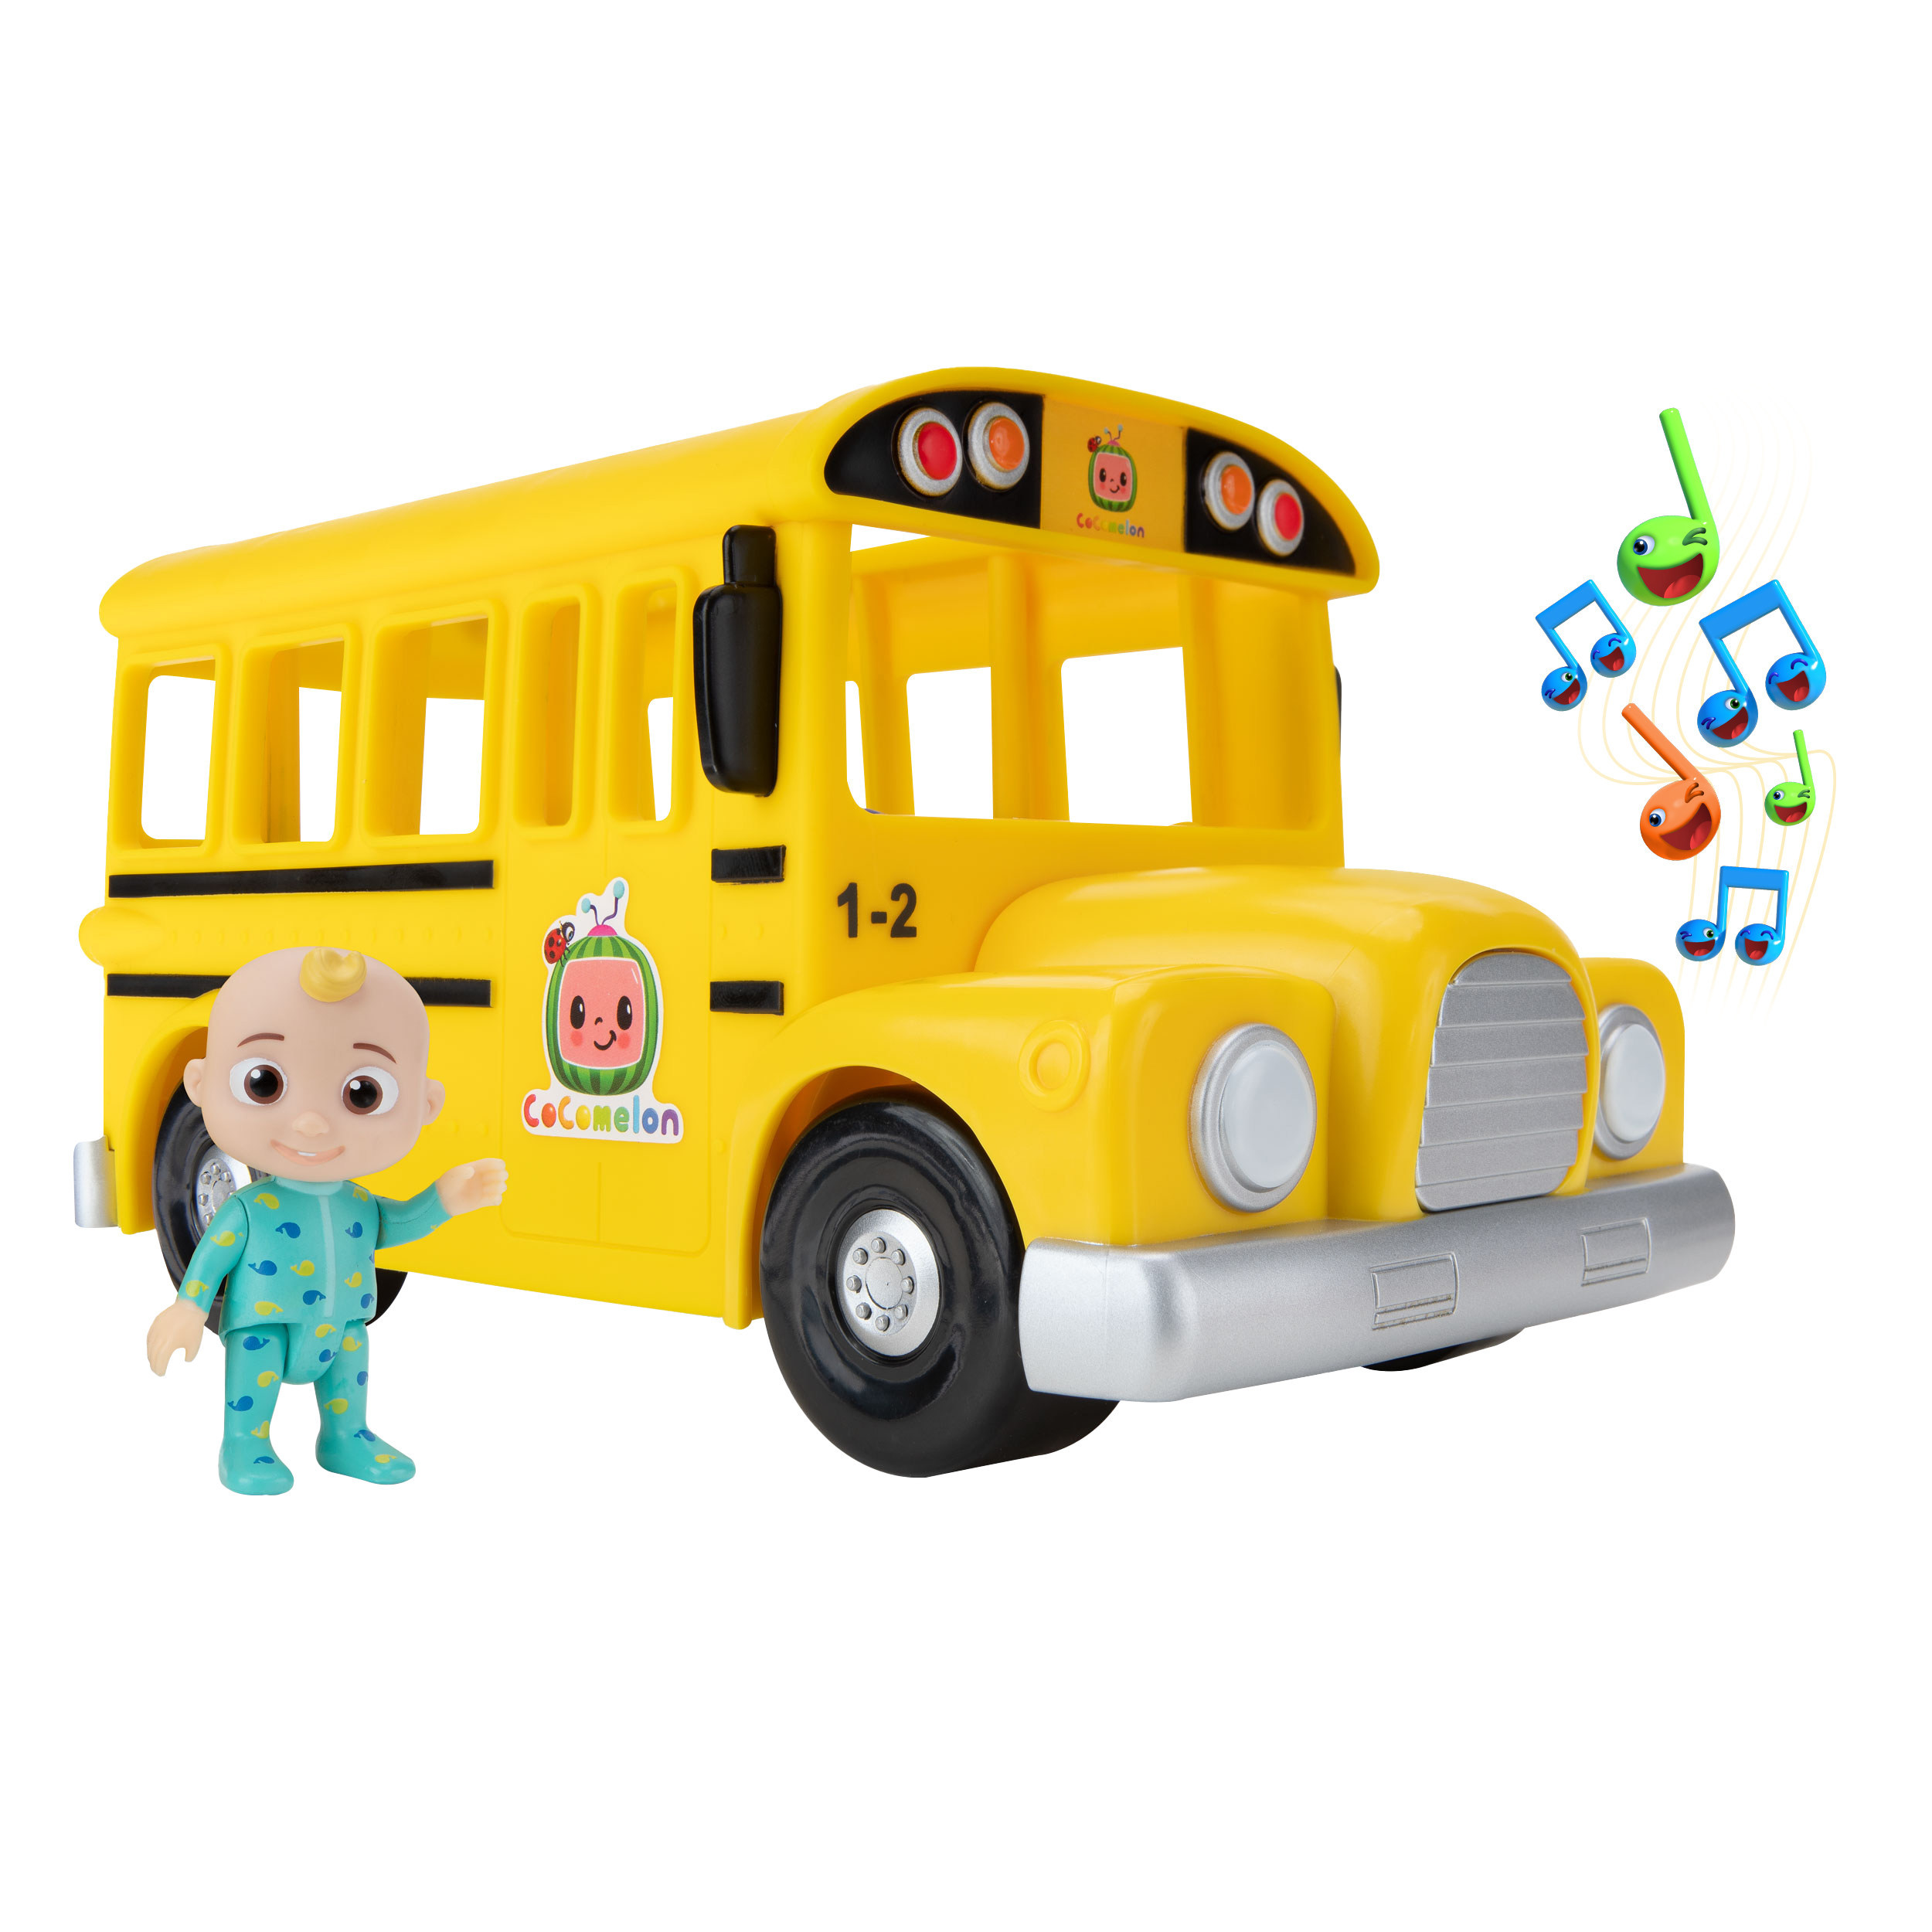 Jazwares Debuts First Toy Line For Cocomelon The 1 Youtube Channel For Kids And Preschoolers - roblox jazwares com